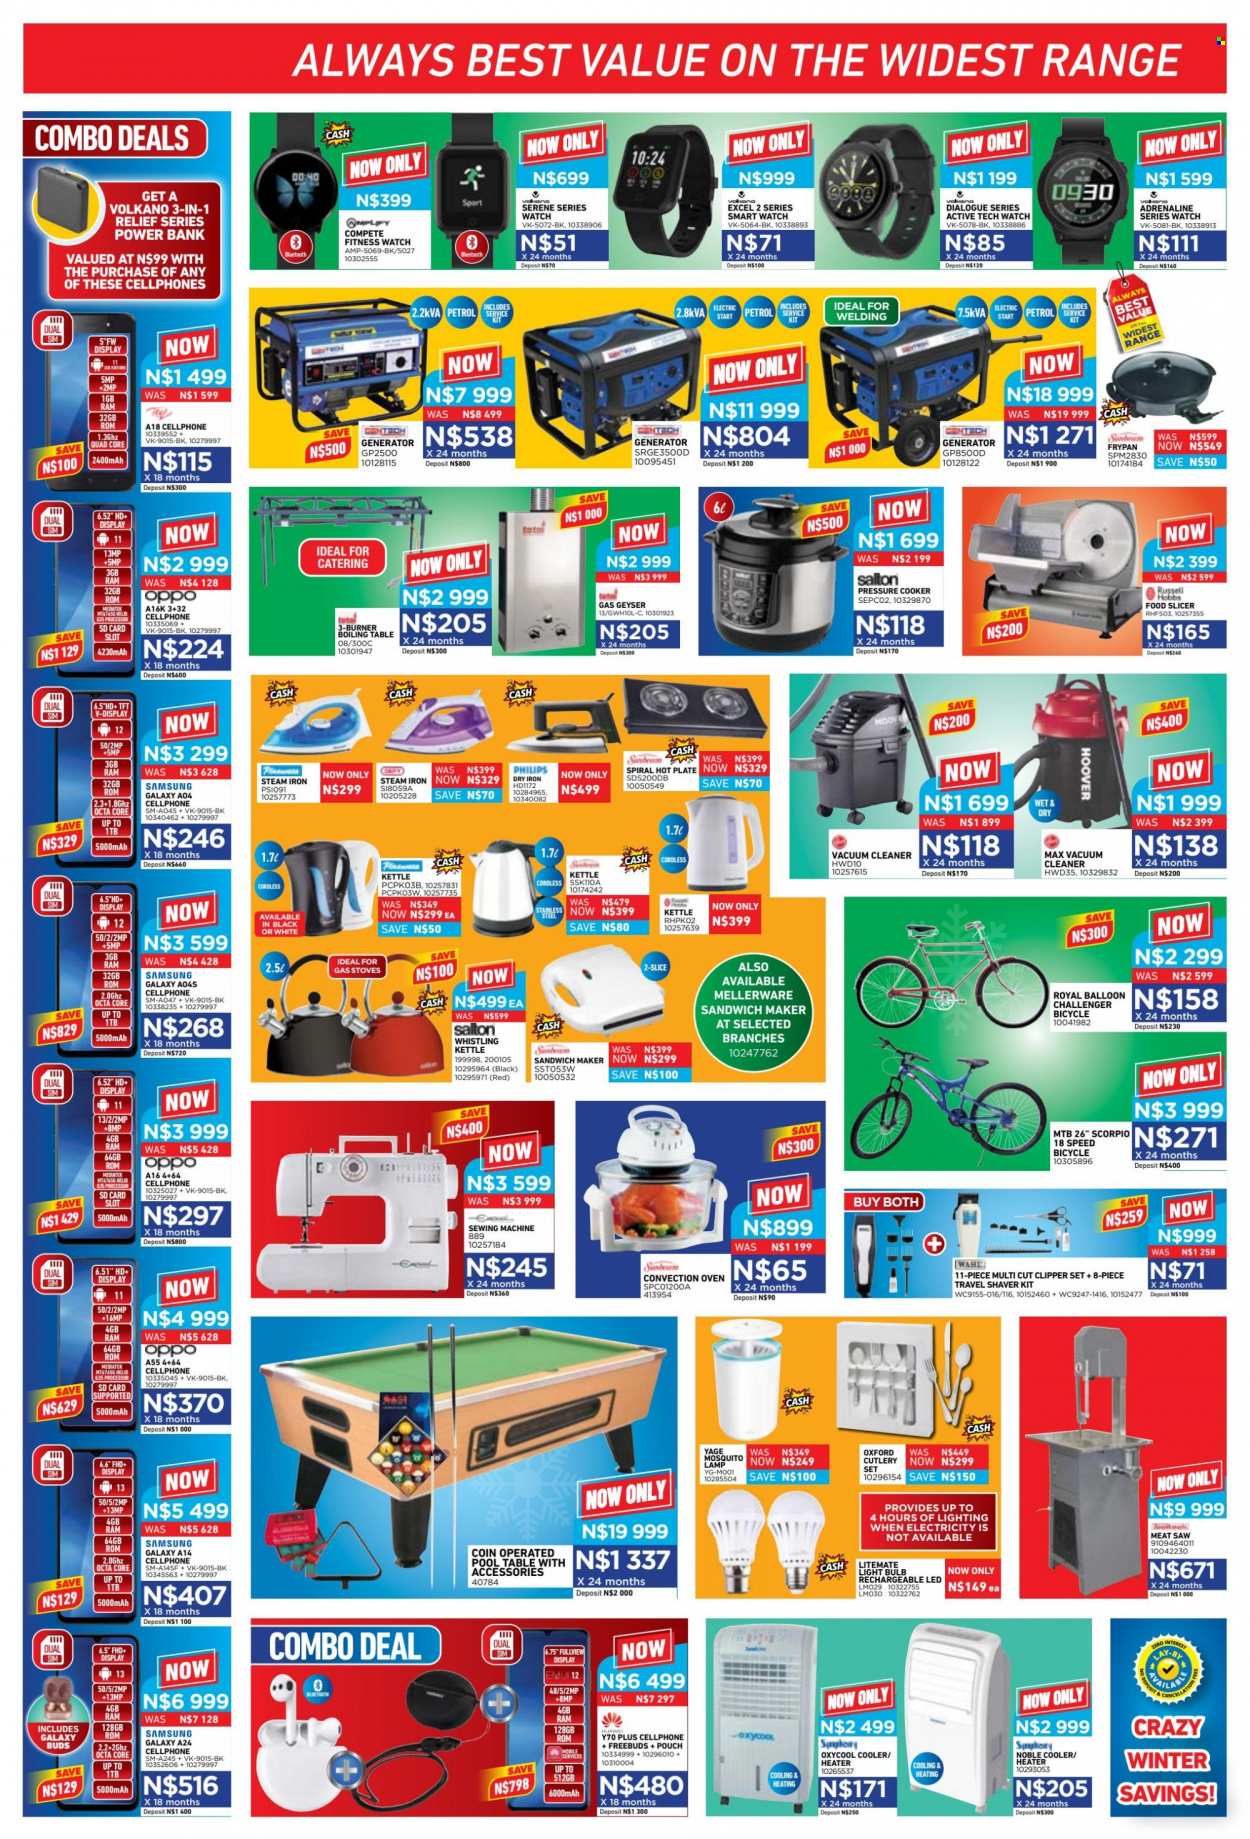 thumbnail - Furnmart catalogue  - 15/05/2023 - 17/06/2023 - Sales products - table, Samsung, Philips, fitness smart watch, smart watch, Samsung Galaxy, memory card, power bank, Volkano, oven, convection oven, Sunbeam, vacuum cleaner, pressure cooker, slicer, Russell Hobbs, sandwich maker, kettle, iron, steam iron, bicycle, generator. Page 7.